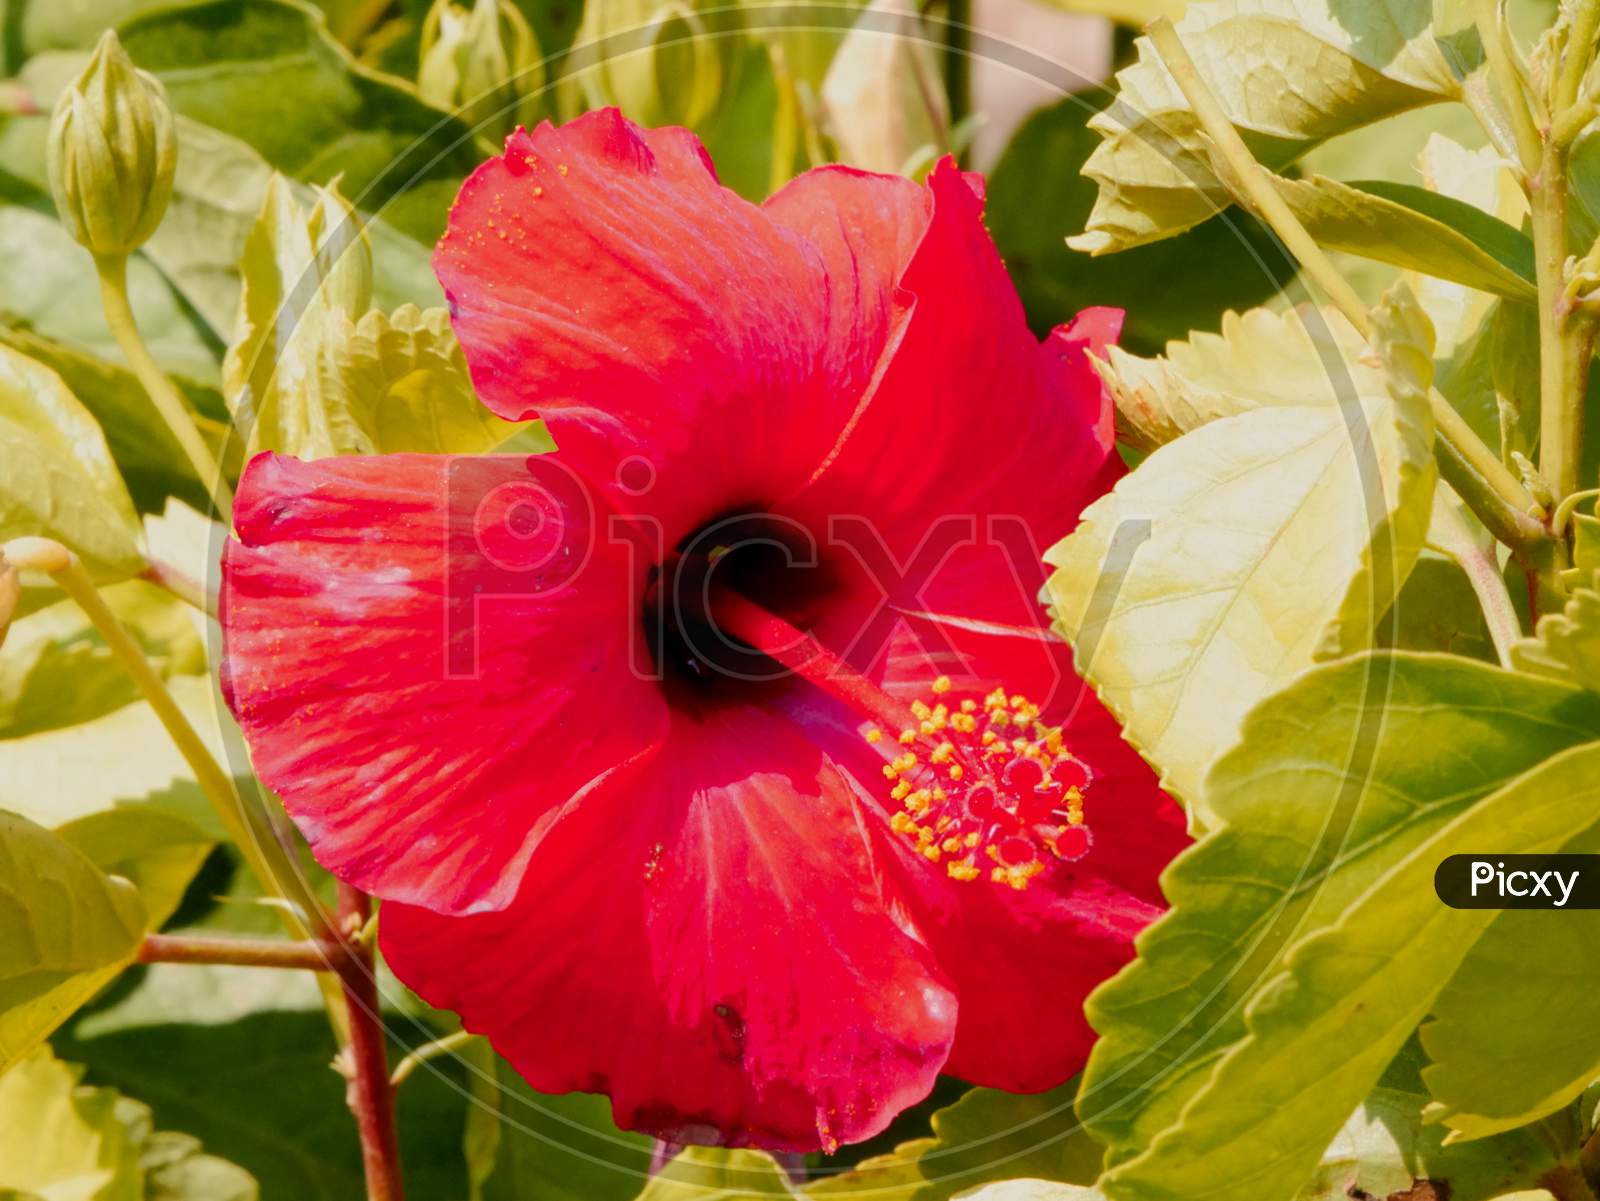 Indian Red Color Hibiscus Flower Closeup Image At Natural Green Background, Nature Beauty Image For Commercial Use.